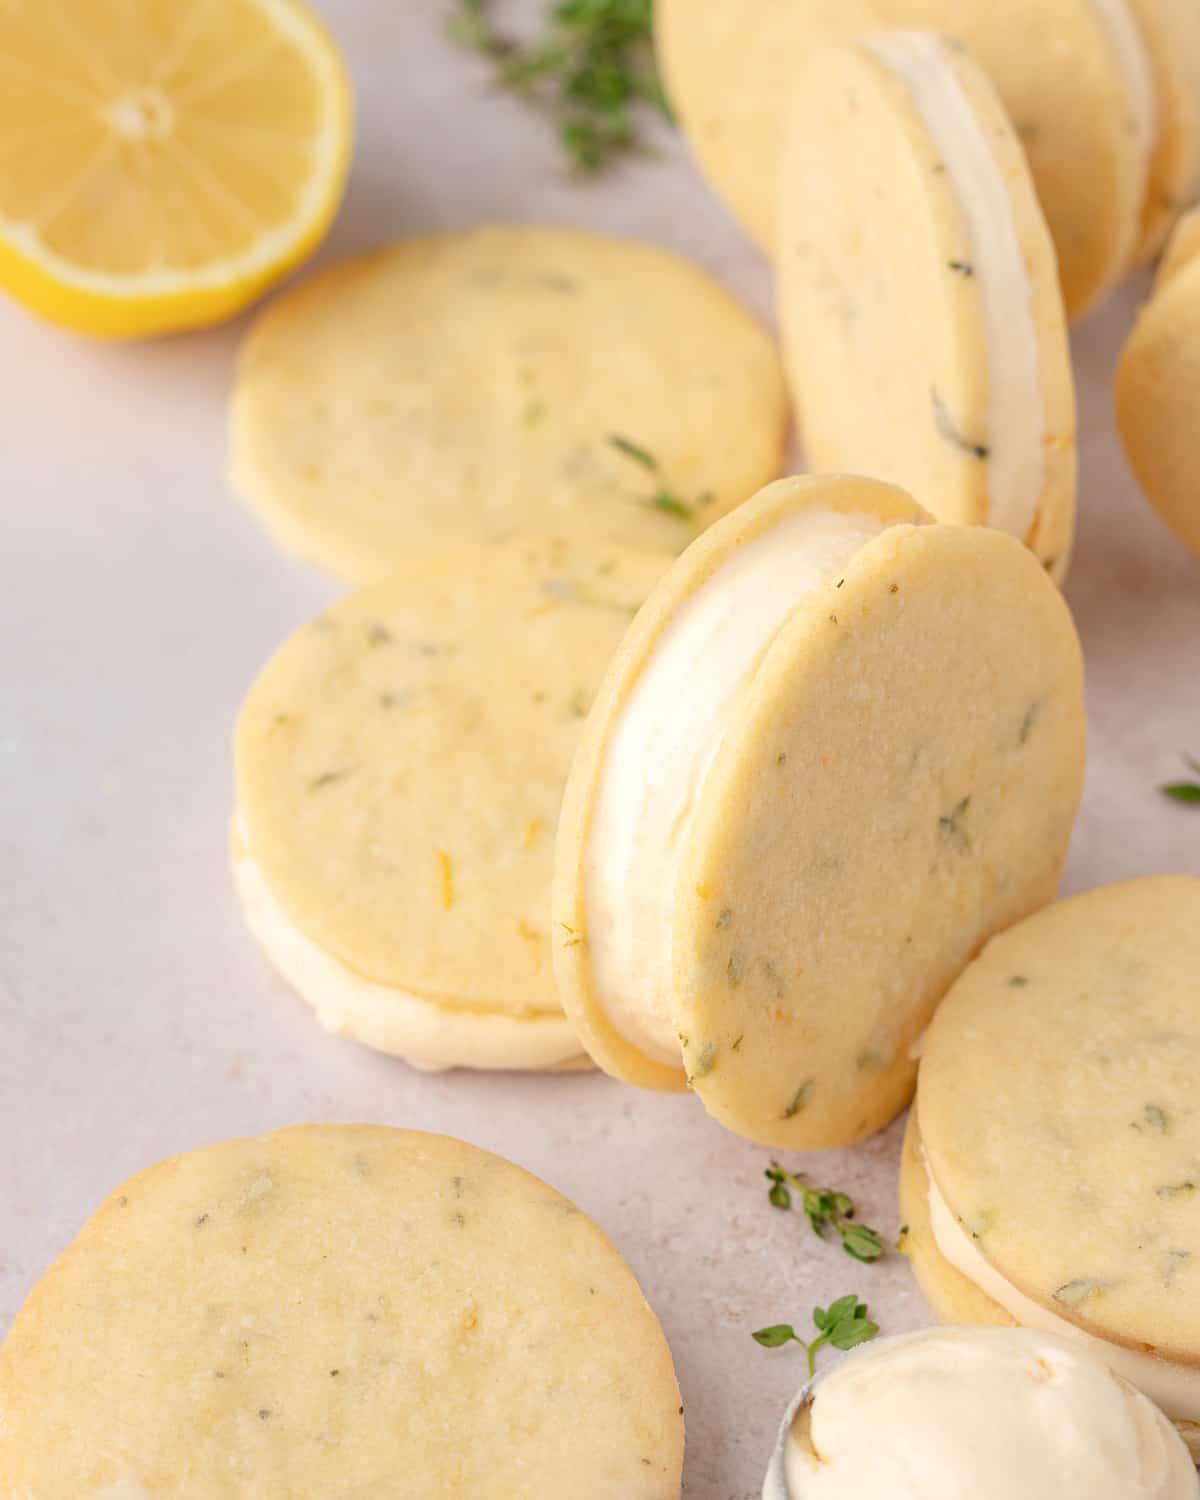 Cut Out Shortbread Cookies - Ahead of Thyme